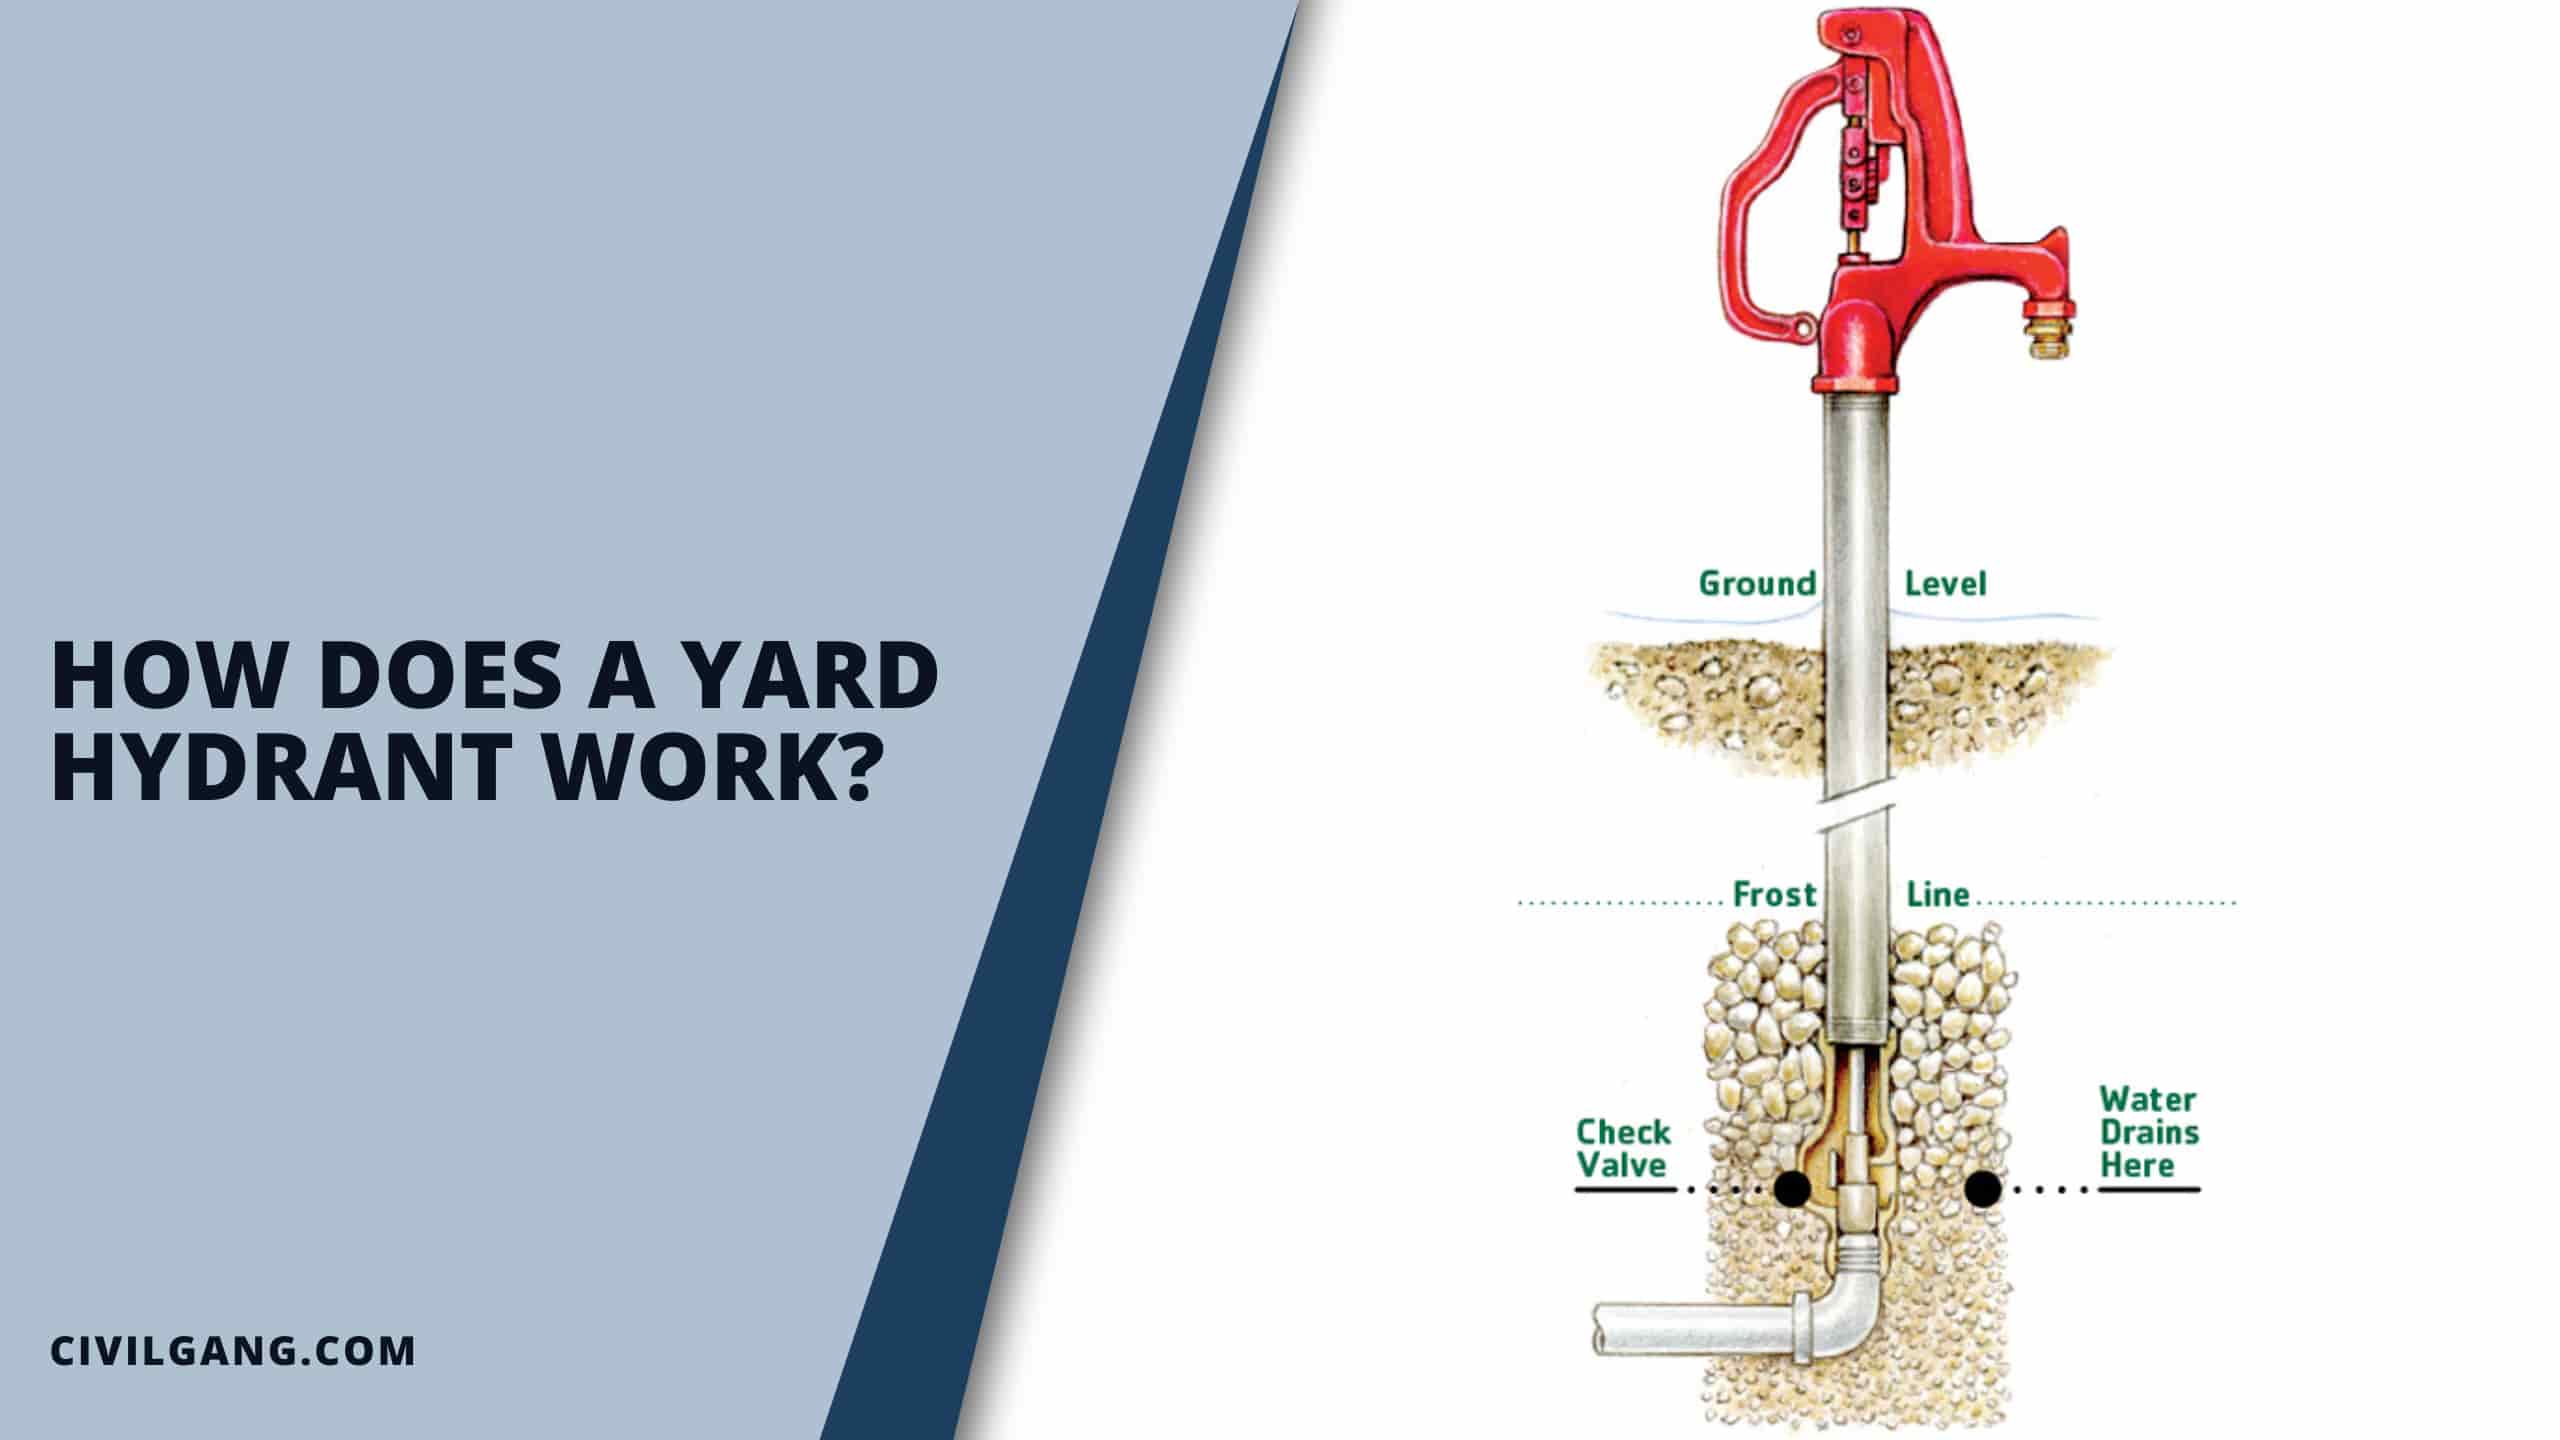 How Does a Yard Hydrant Work?